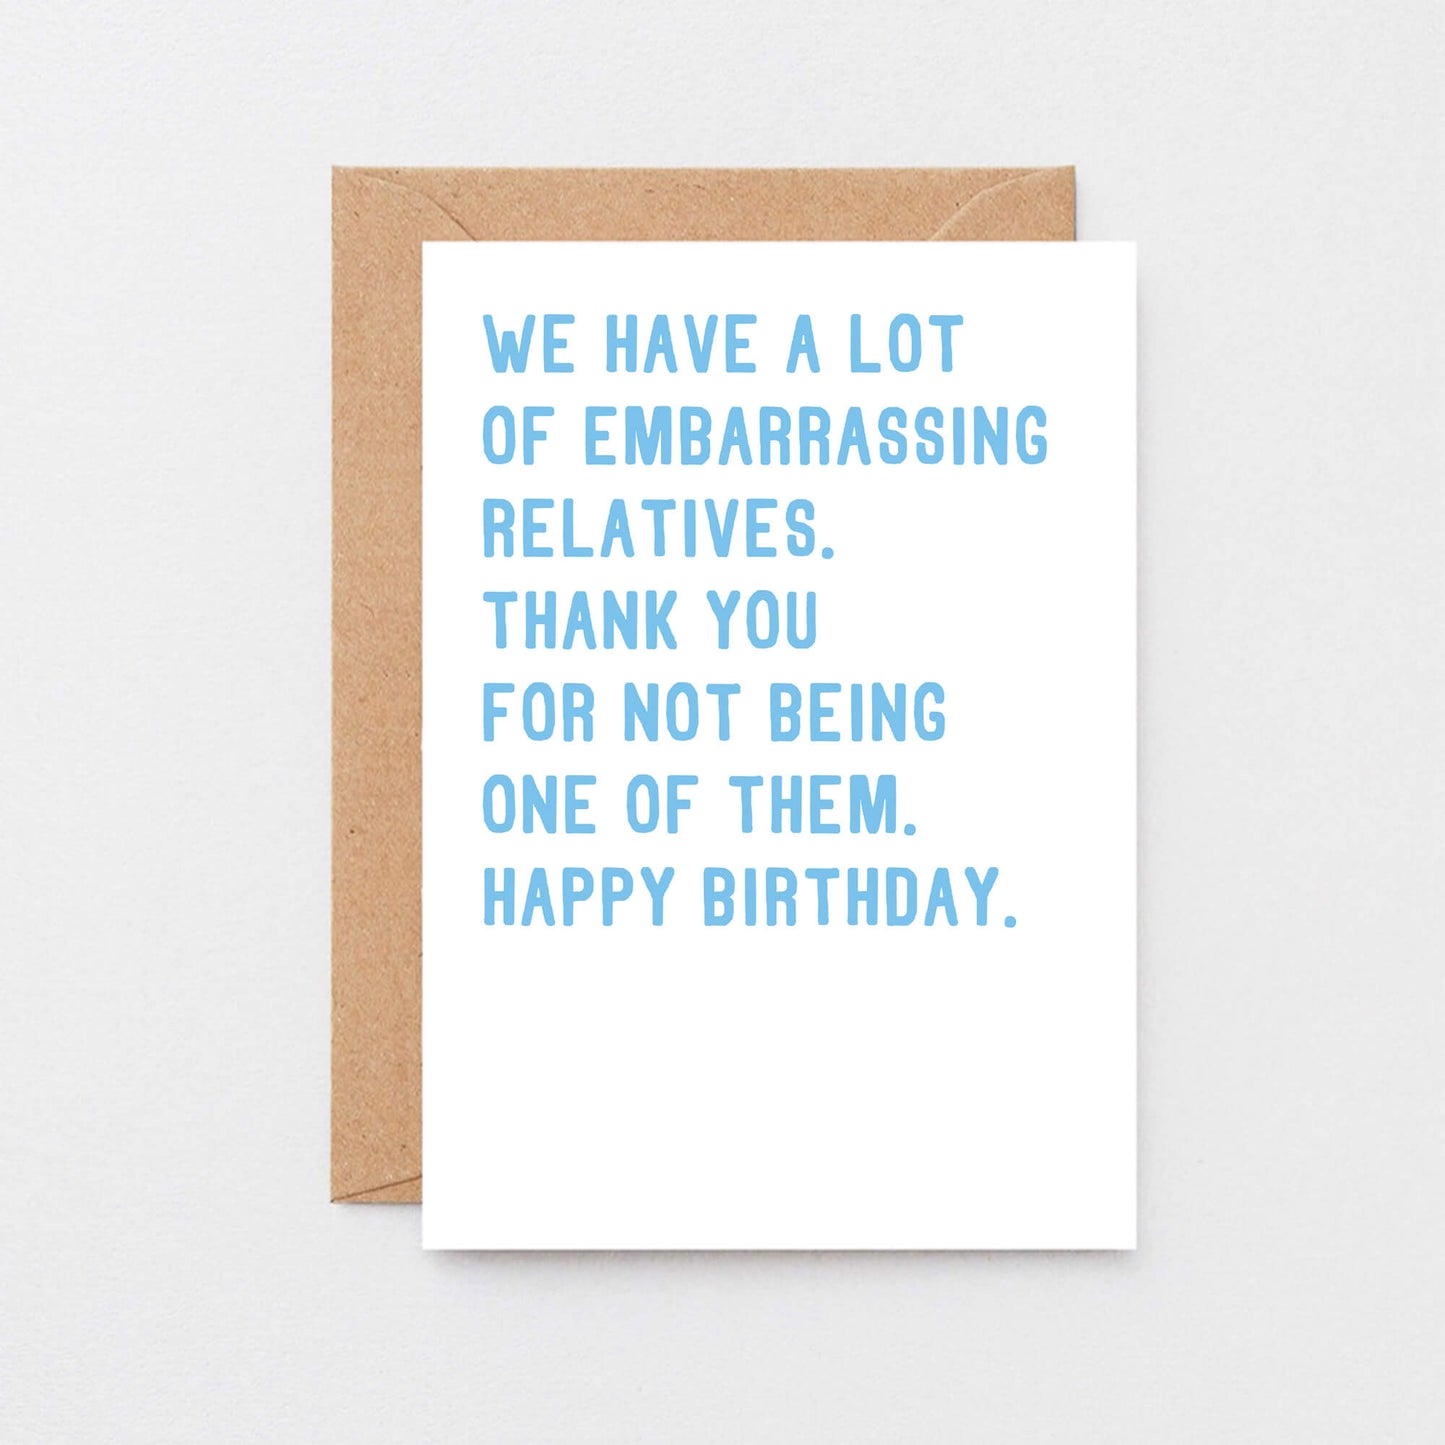 Funny Birthday Card by SixElevenCreations. Reads We have a lot of embarrassing relatives. Thank you for not being one of them. Happy birthday. Product Code SE2021A6